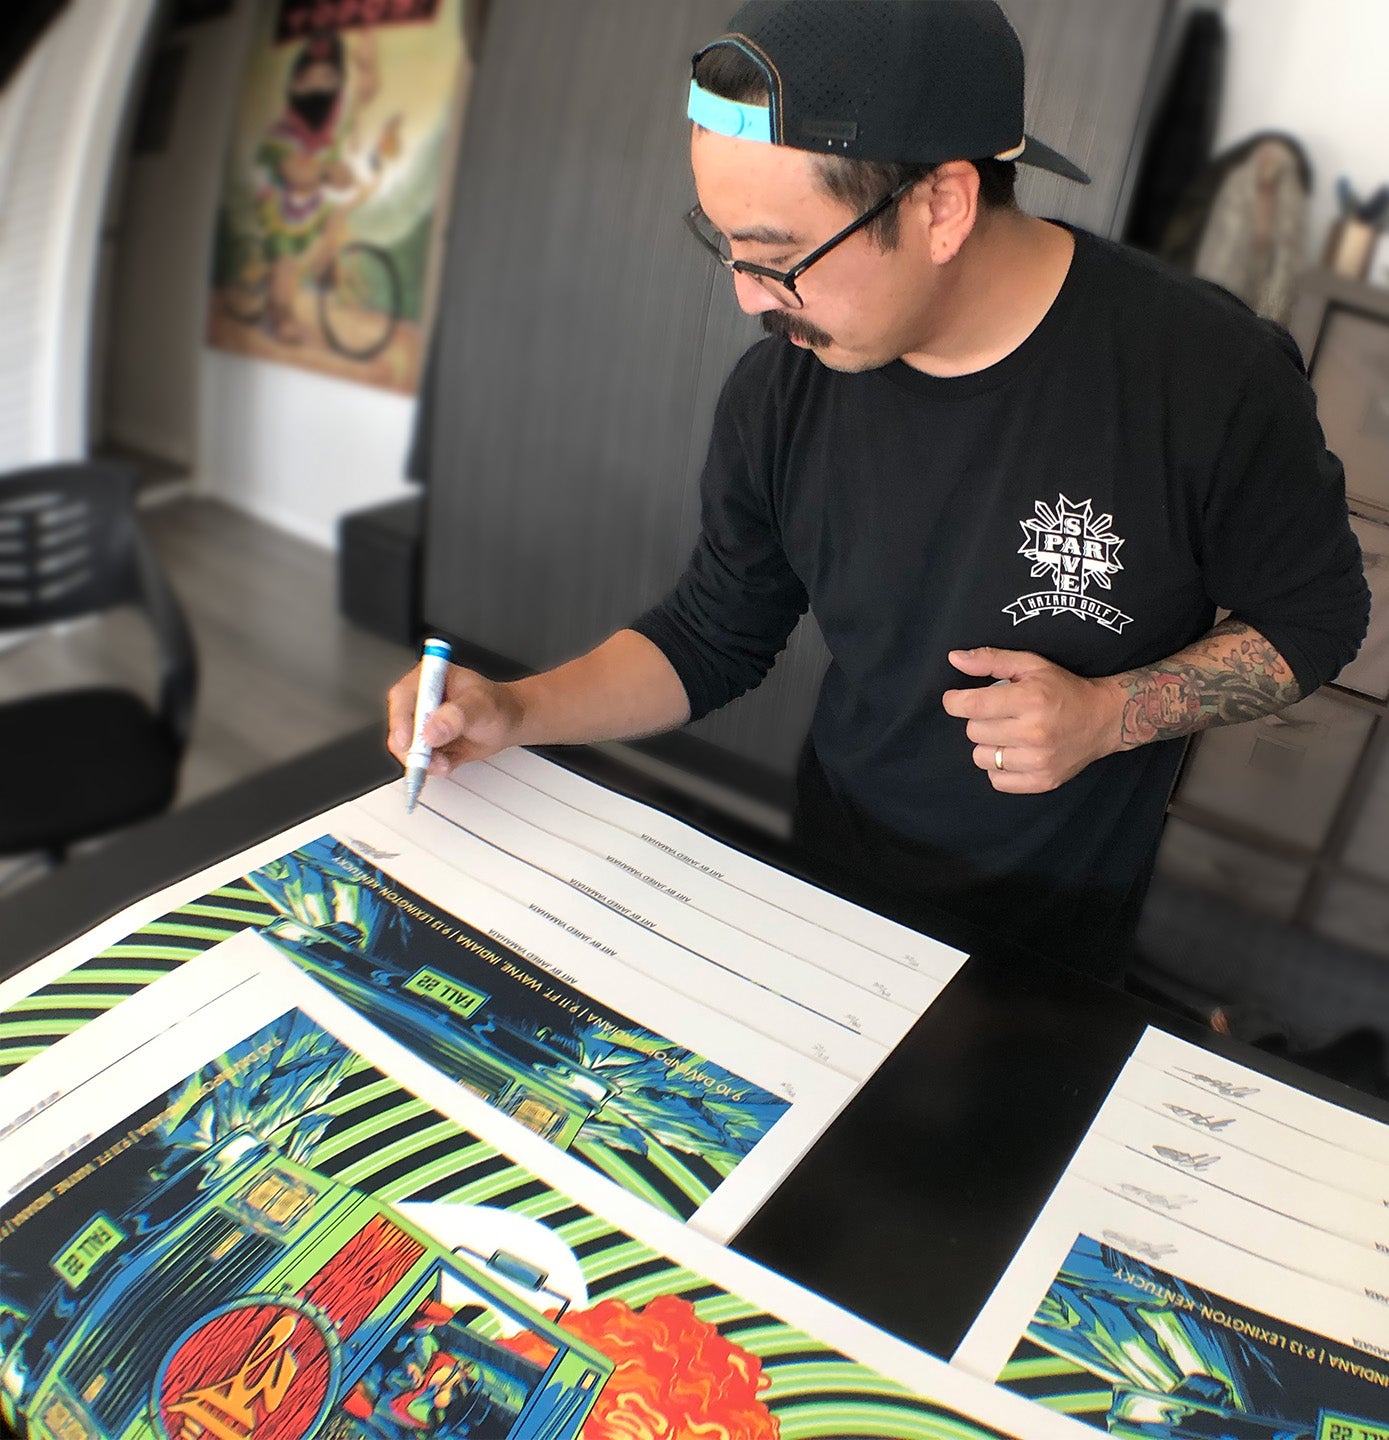 10 QUESTIONS WITH… Artist JARED YAMAHATA